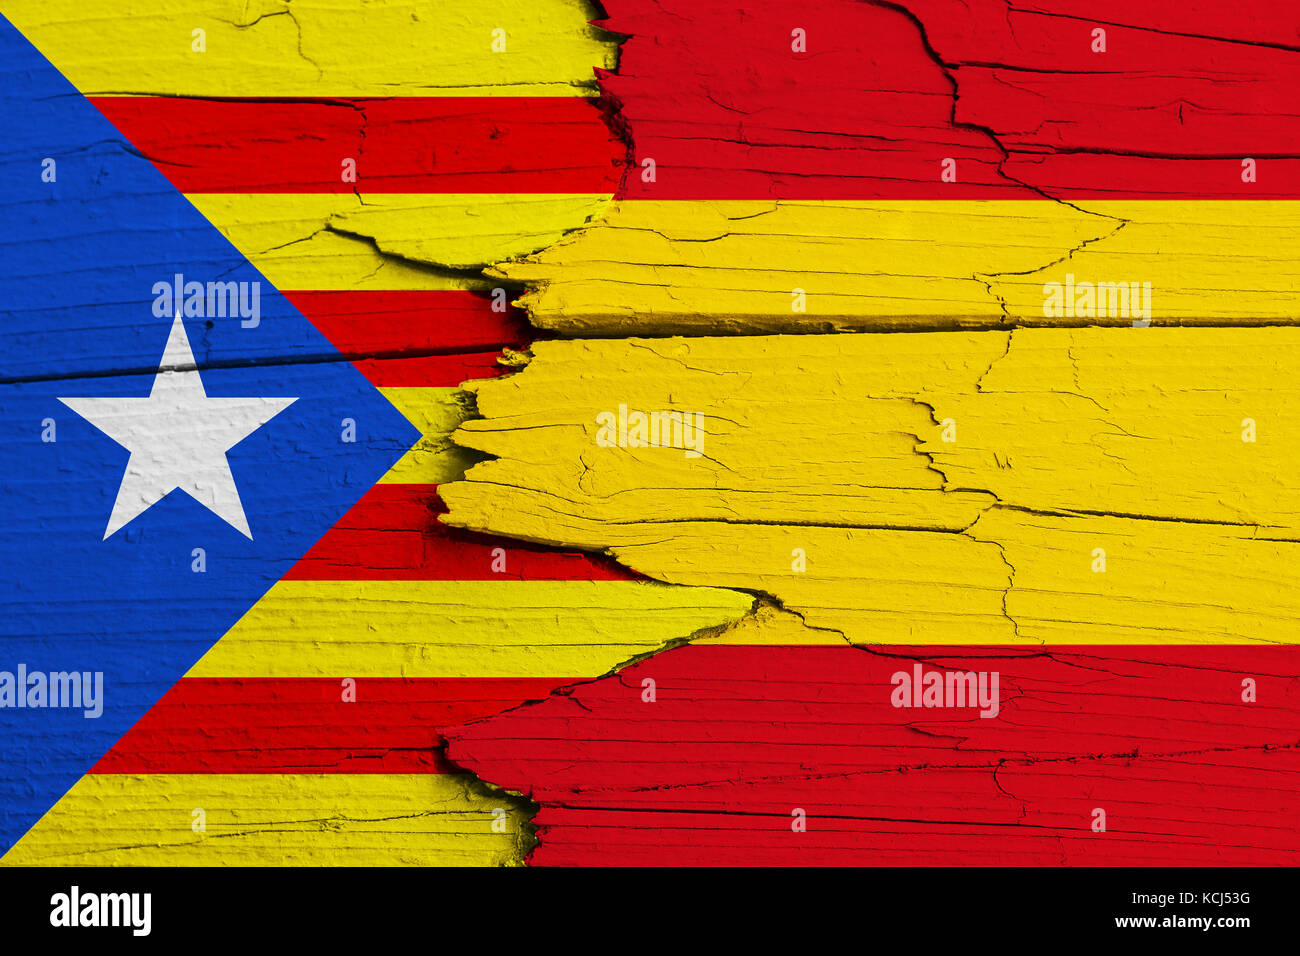 Catalonia independence movement versus Spain: symbolic for ongoing dispute on separation and autonomy. Flags of Catalan separatism and Spanish nationa Stock Photo